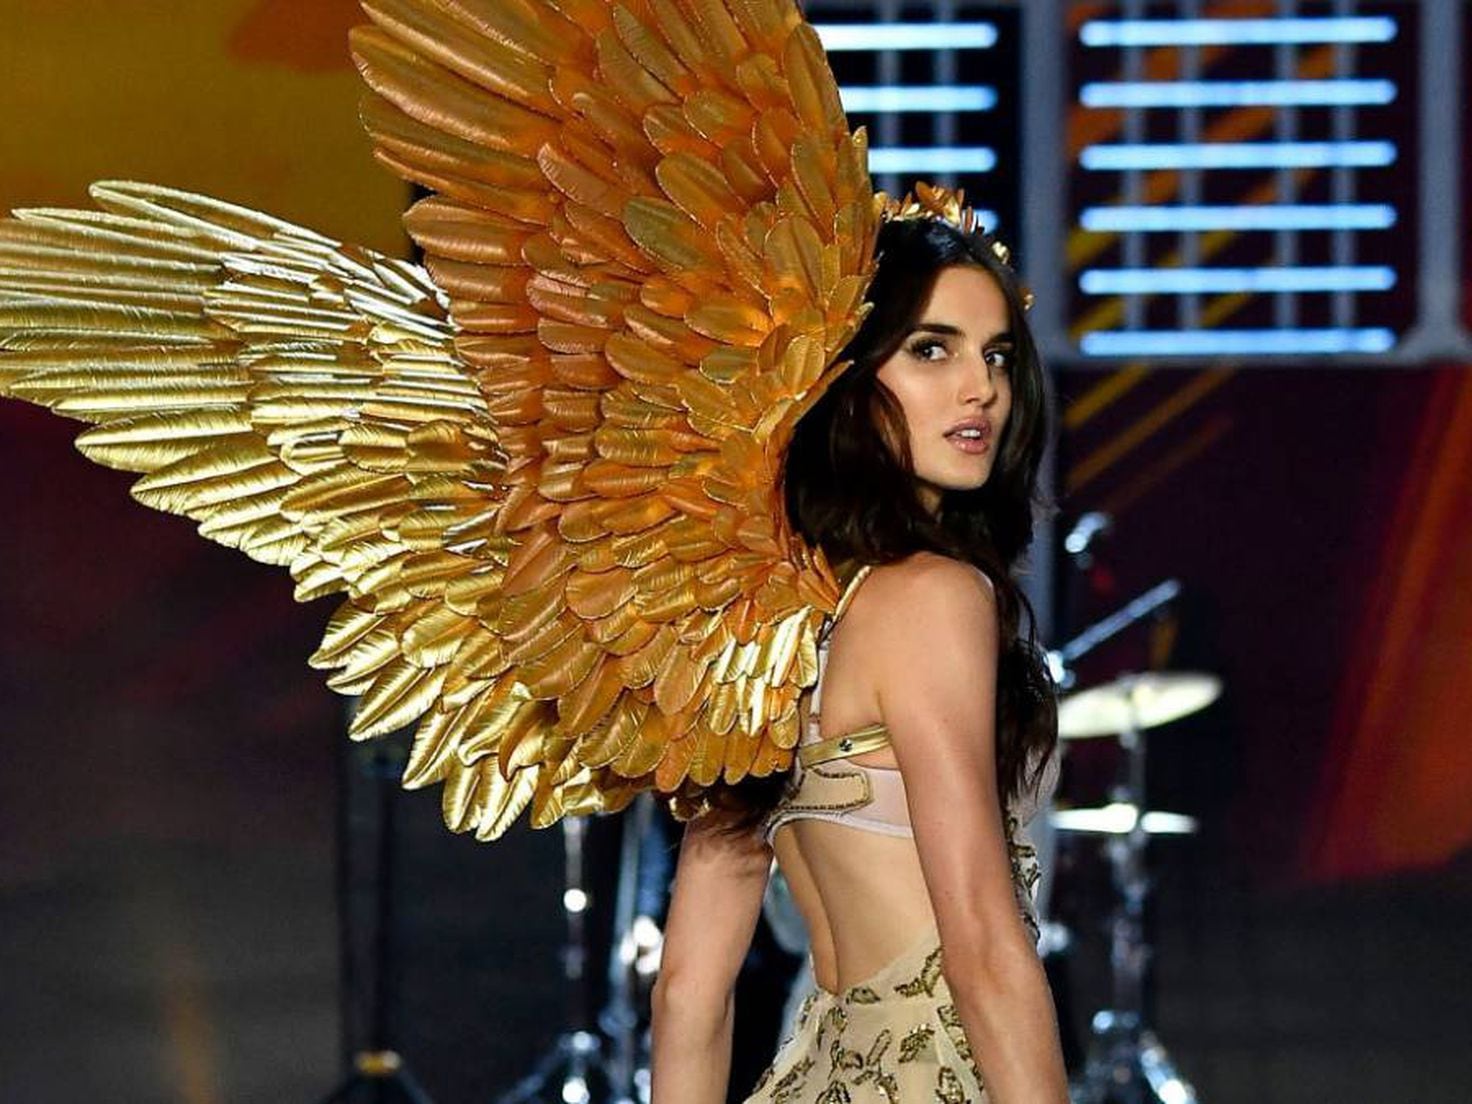 Victoria's Secret to Restart Annual Fashion Show Without Angels